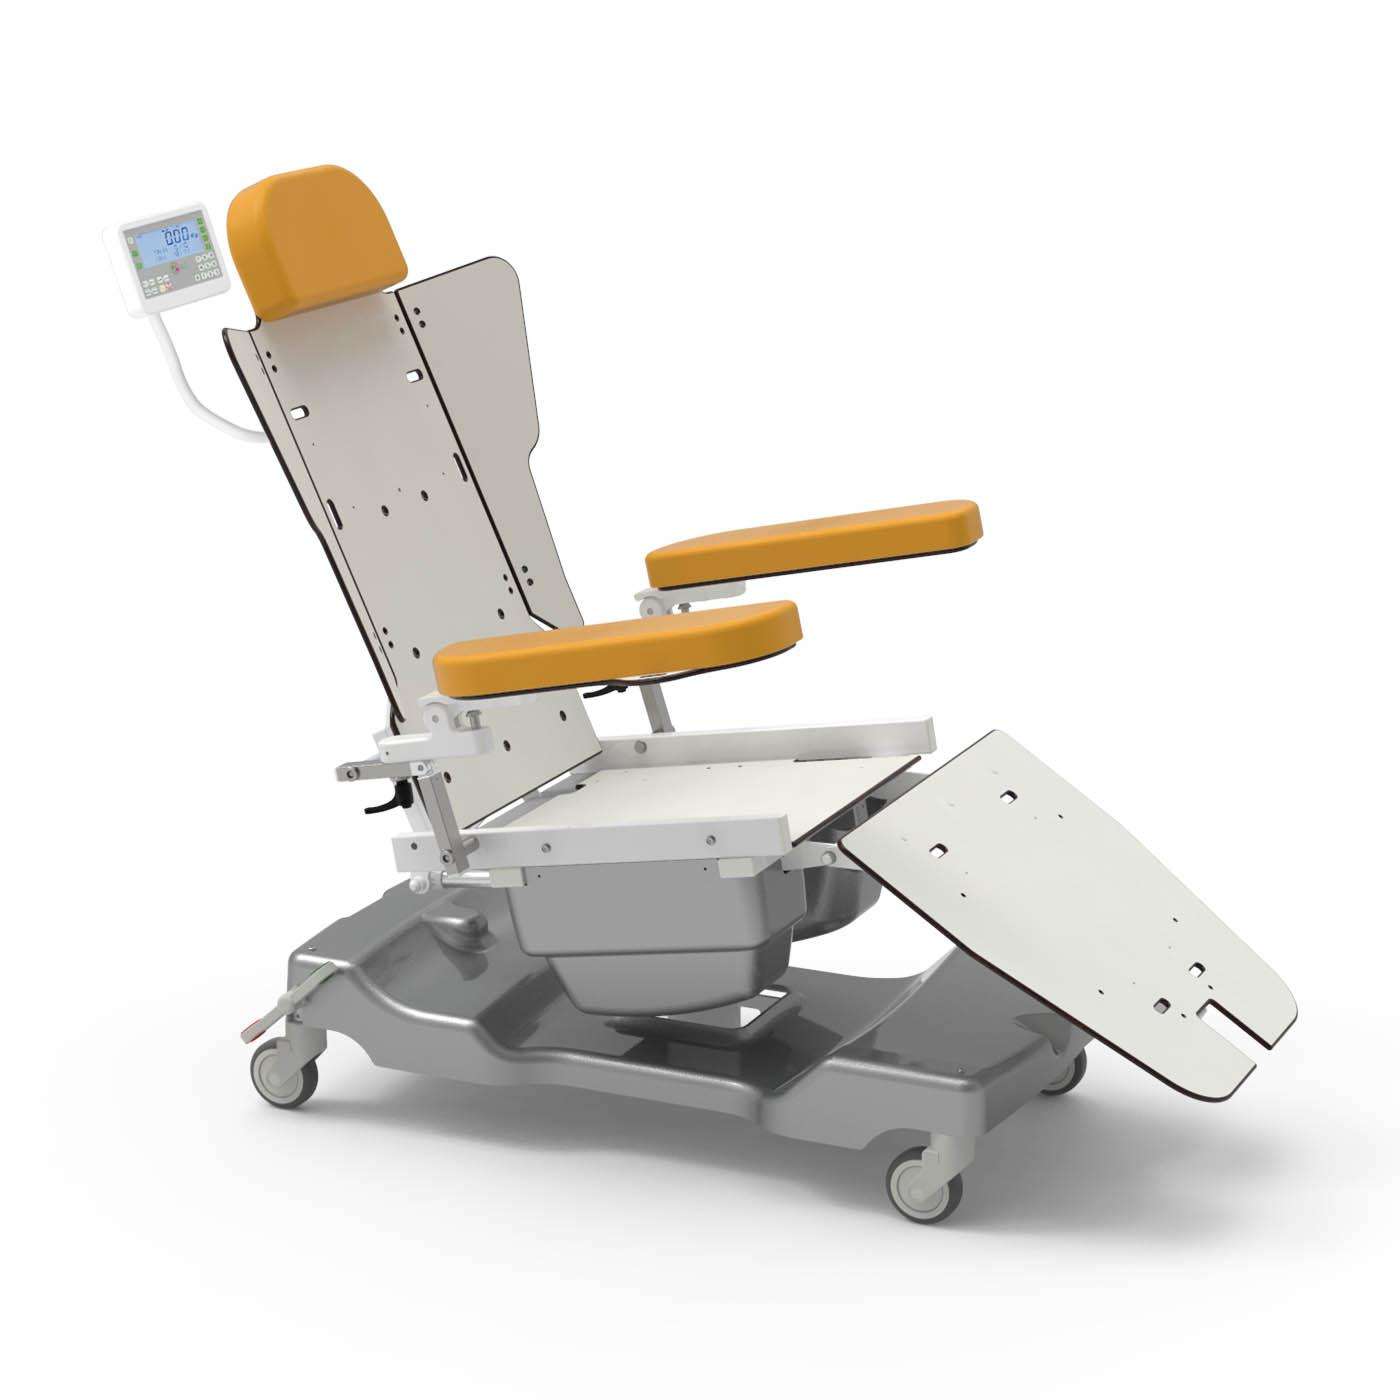 Vivid Care's Medical treatment Infusion Therapy Chair with padded upholstery removed for easier cleaning.